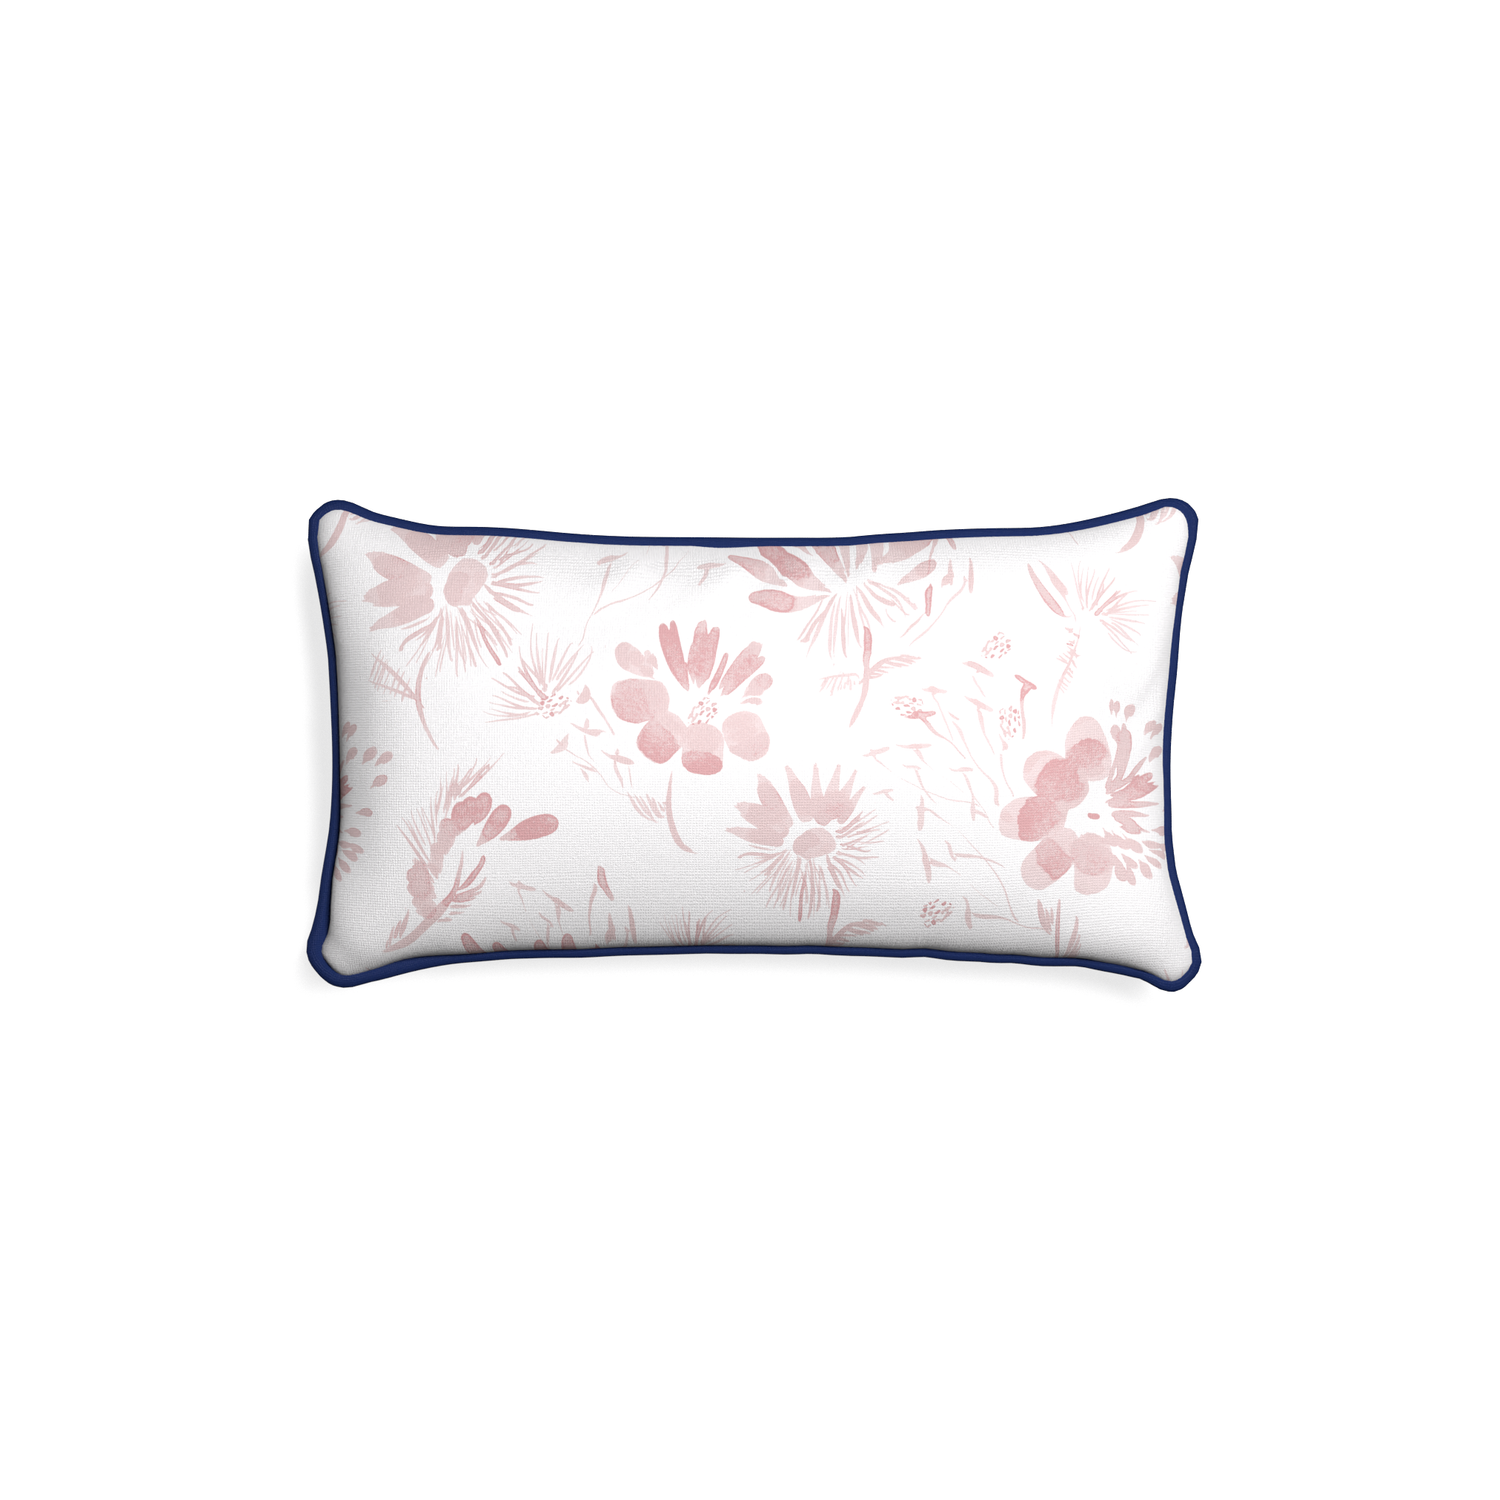 Petite-lumbar blake custom pink floralpillow with midnight piping on white background